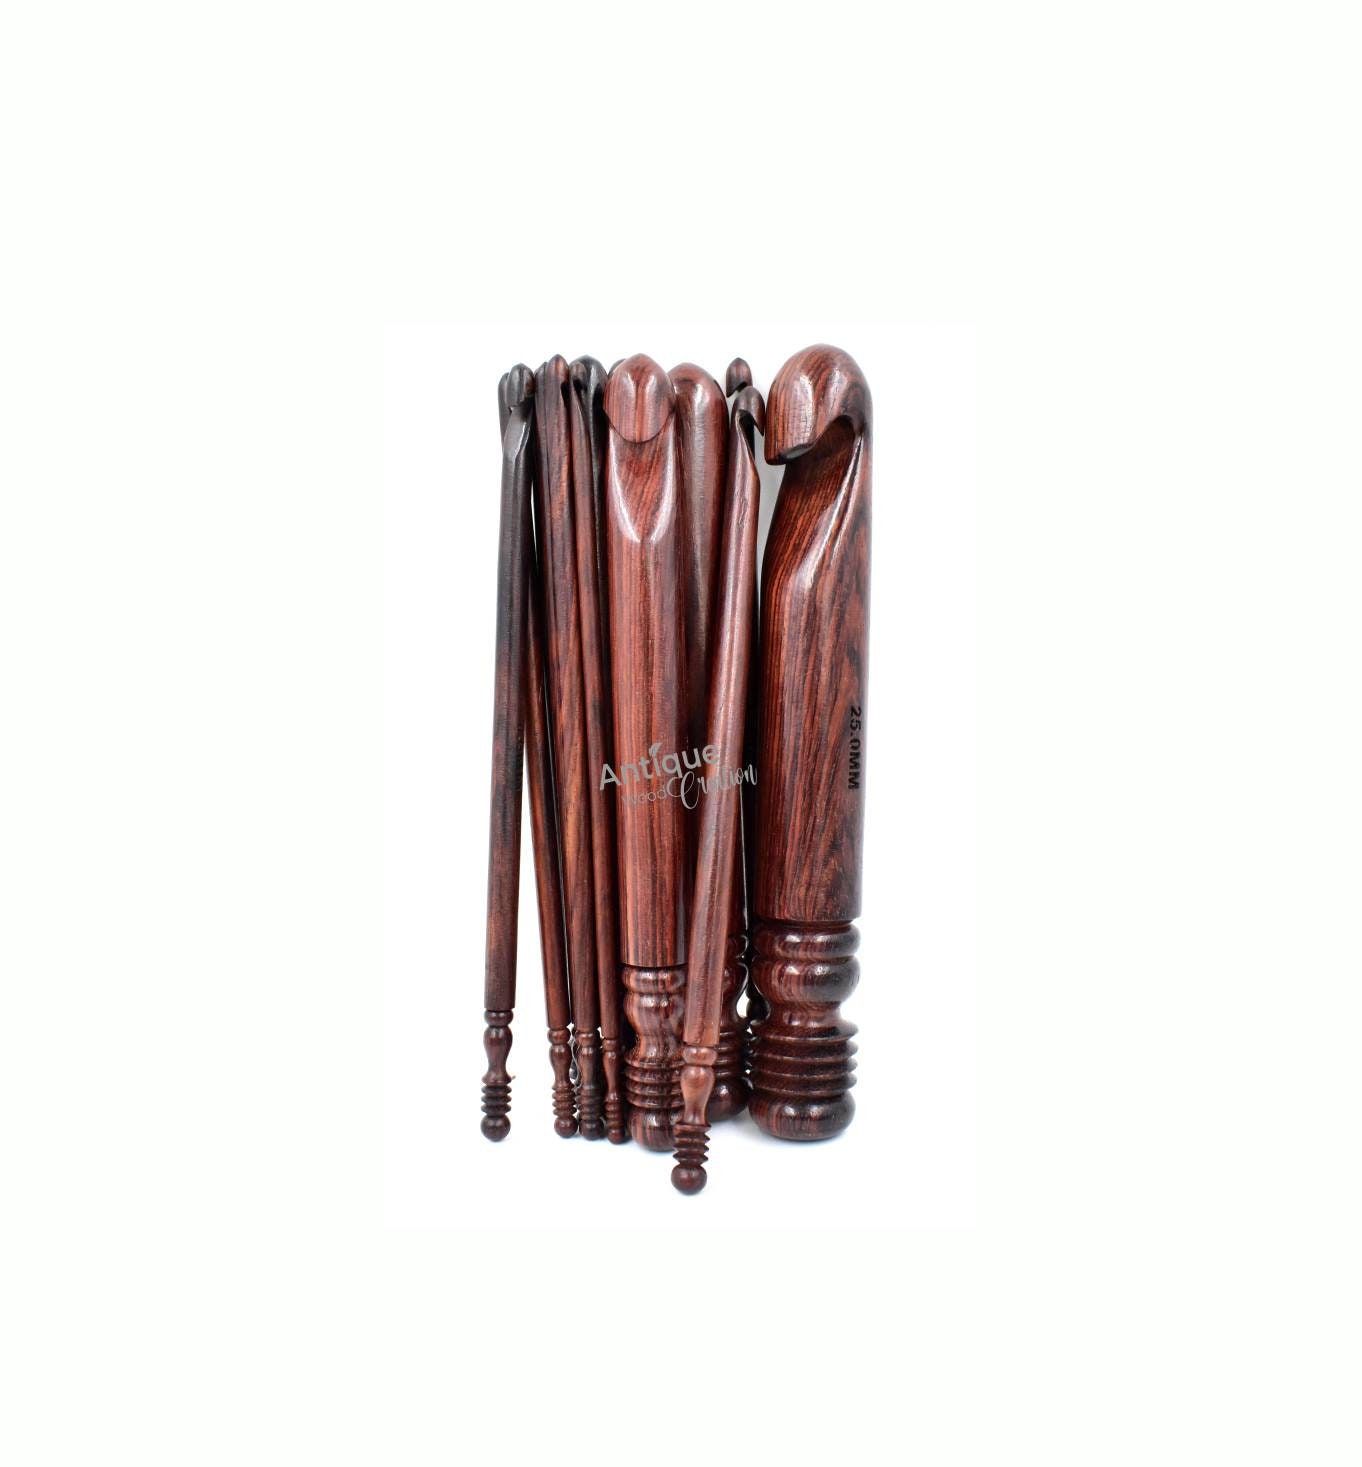 Wooden Crochet Hooks Set with Leather Bag - Set of 15 Size 3.5mm to 25mm,  Rosewood Crochet Hooks Knitting Needle, Knitting and Crocheting